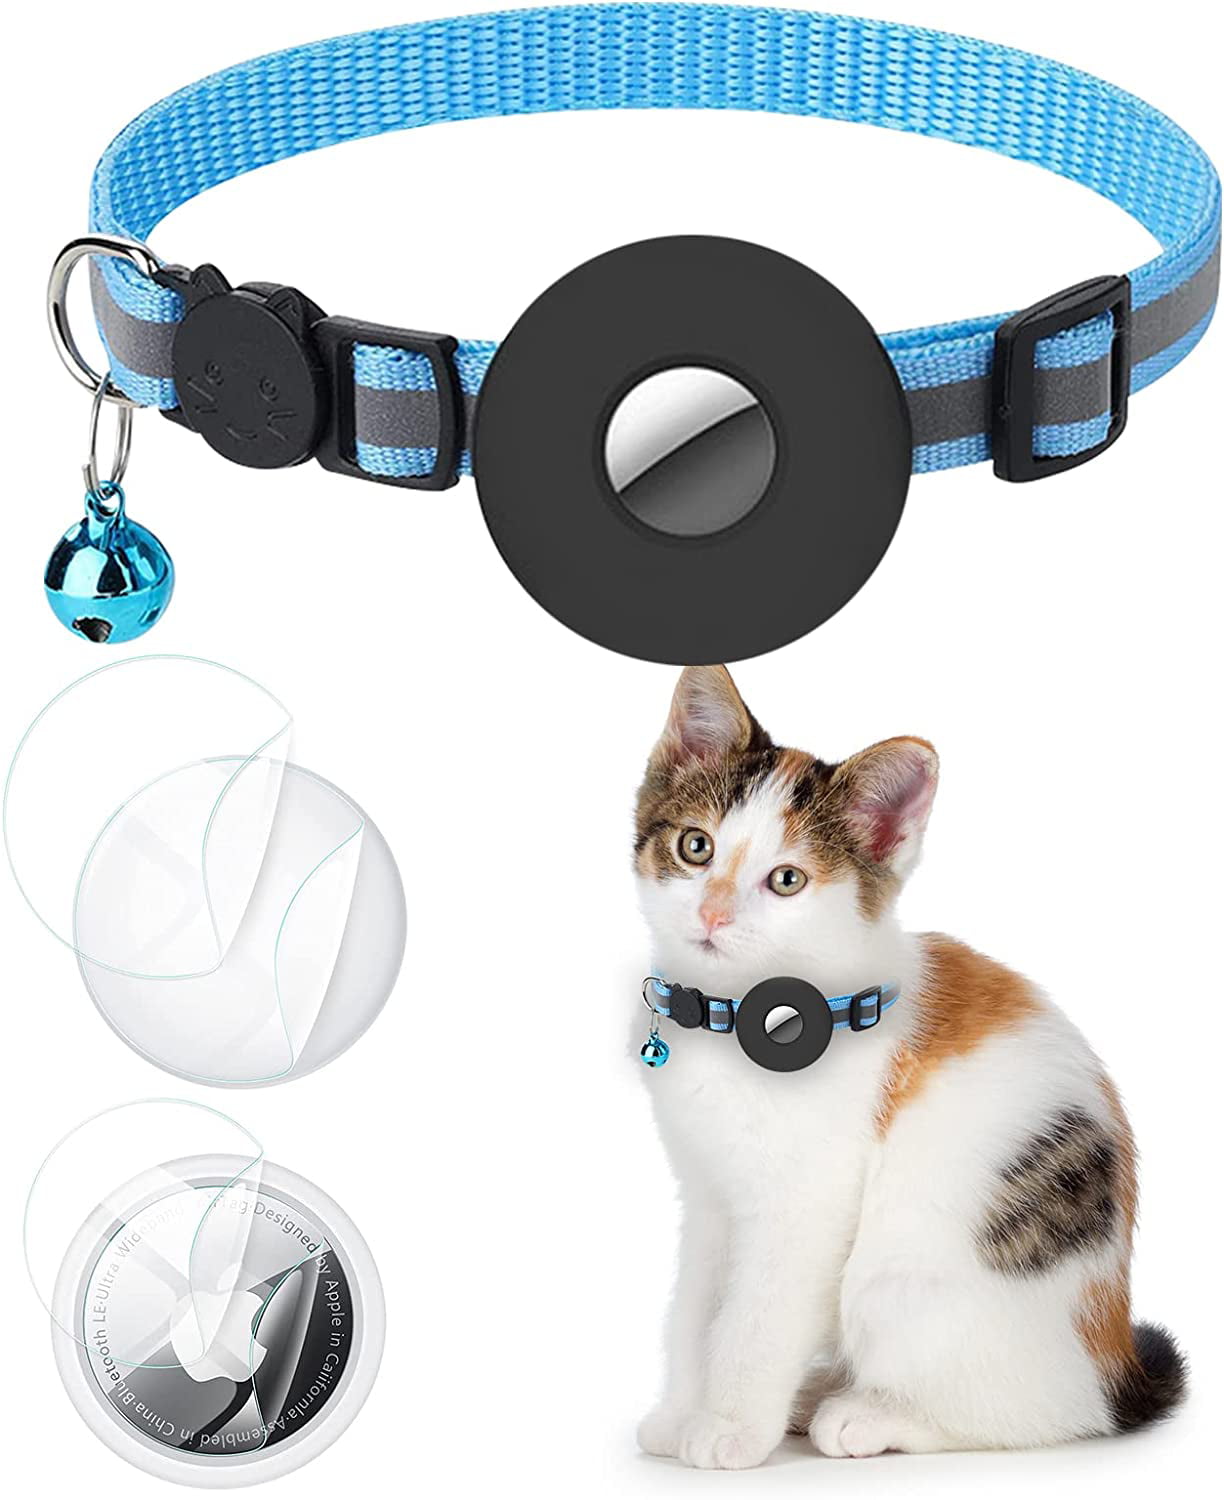 Airtag Cat Collar, Cat Collar With Bell And Safety Clasp, Reflective Adjustable 22-35Cm Collar With Protective Film, For Cats Puppy Kittens (Black) - Walmart.com